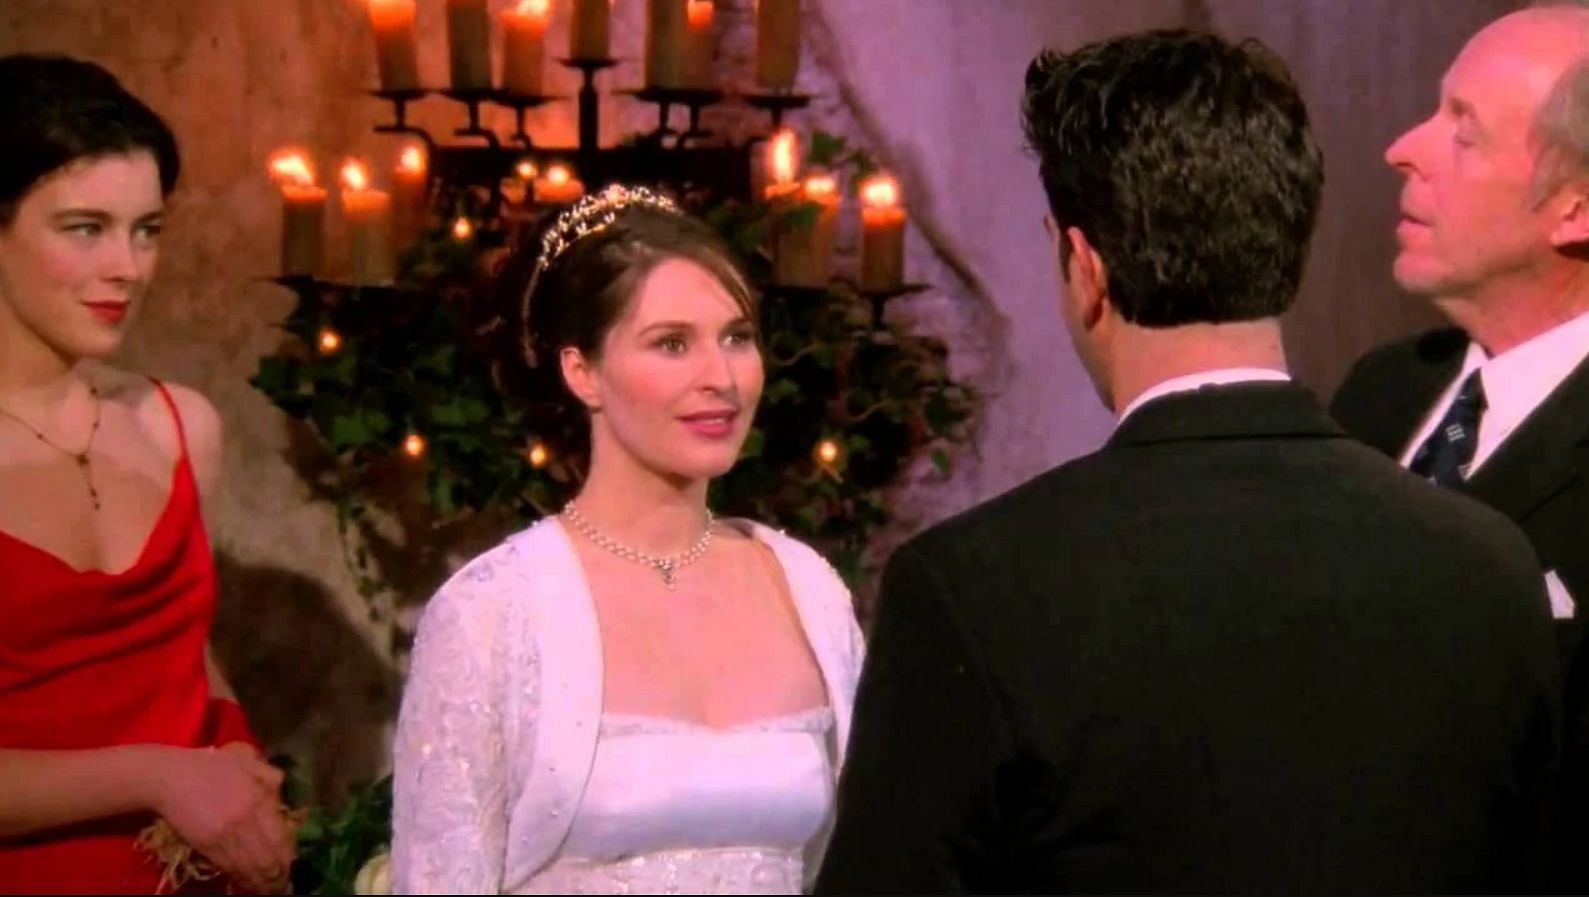 Ross and Emily&#039;s wedding (Image via Friends)